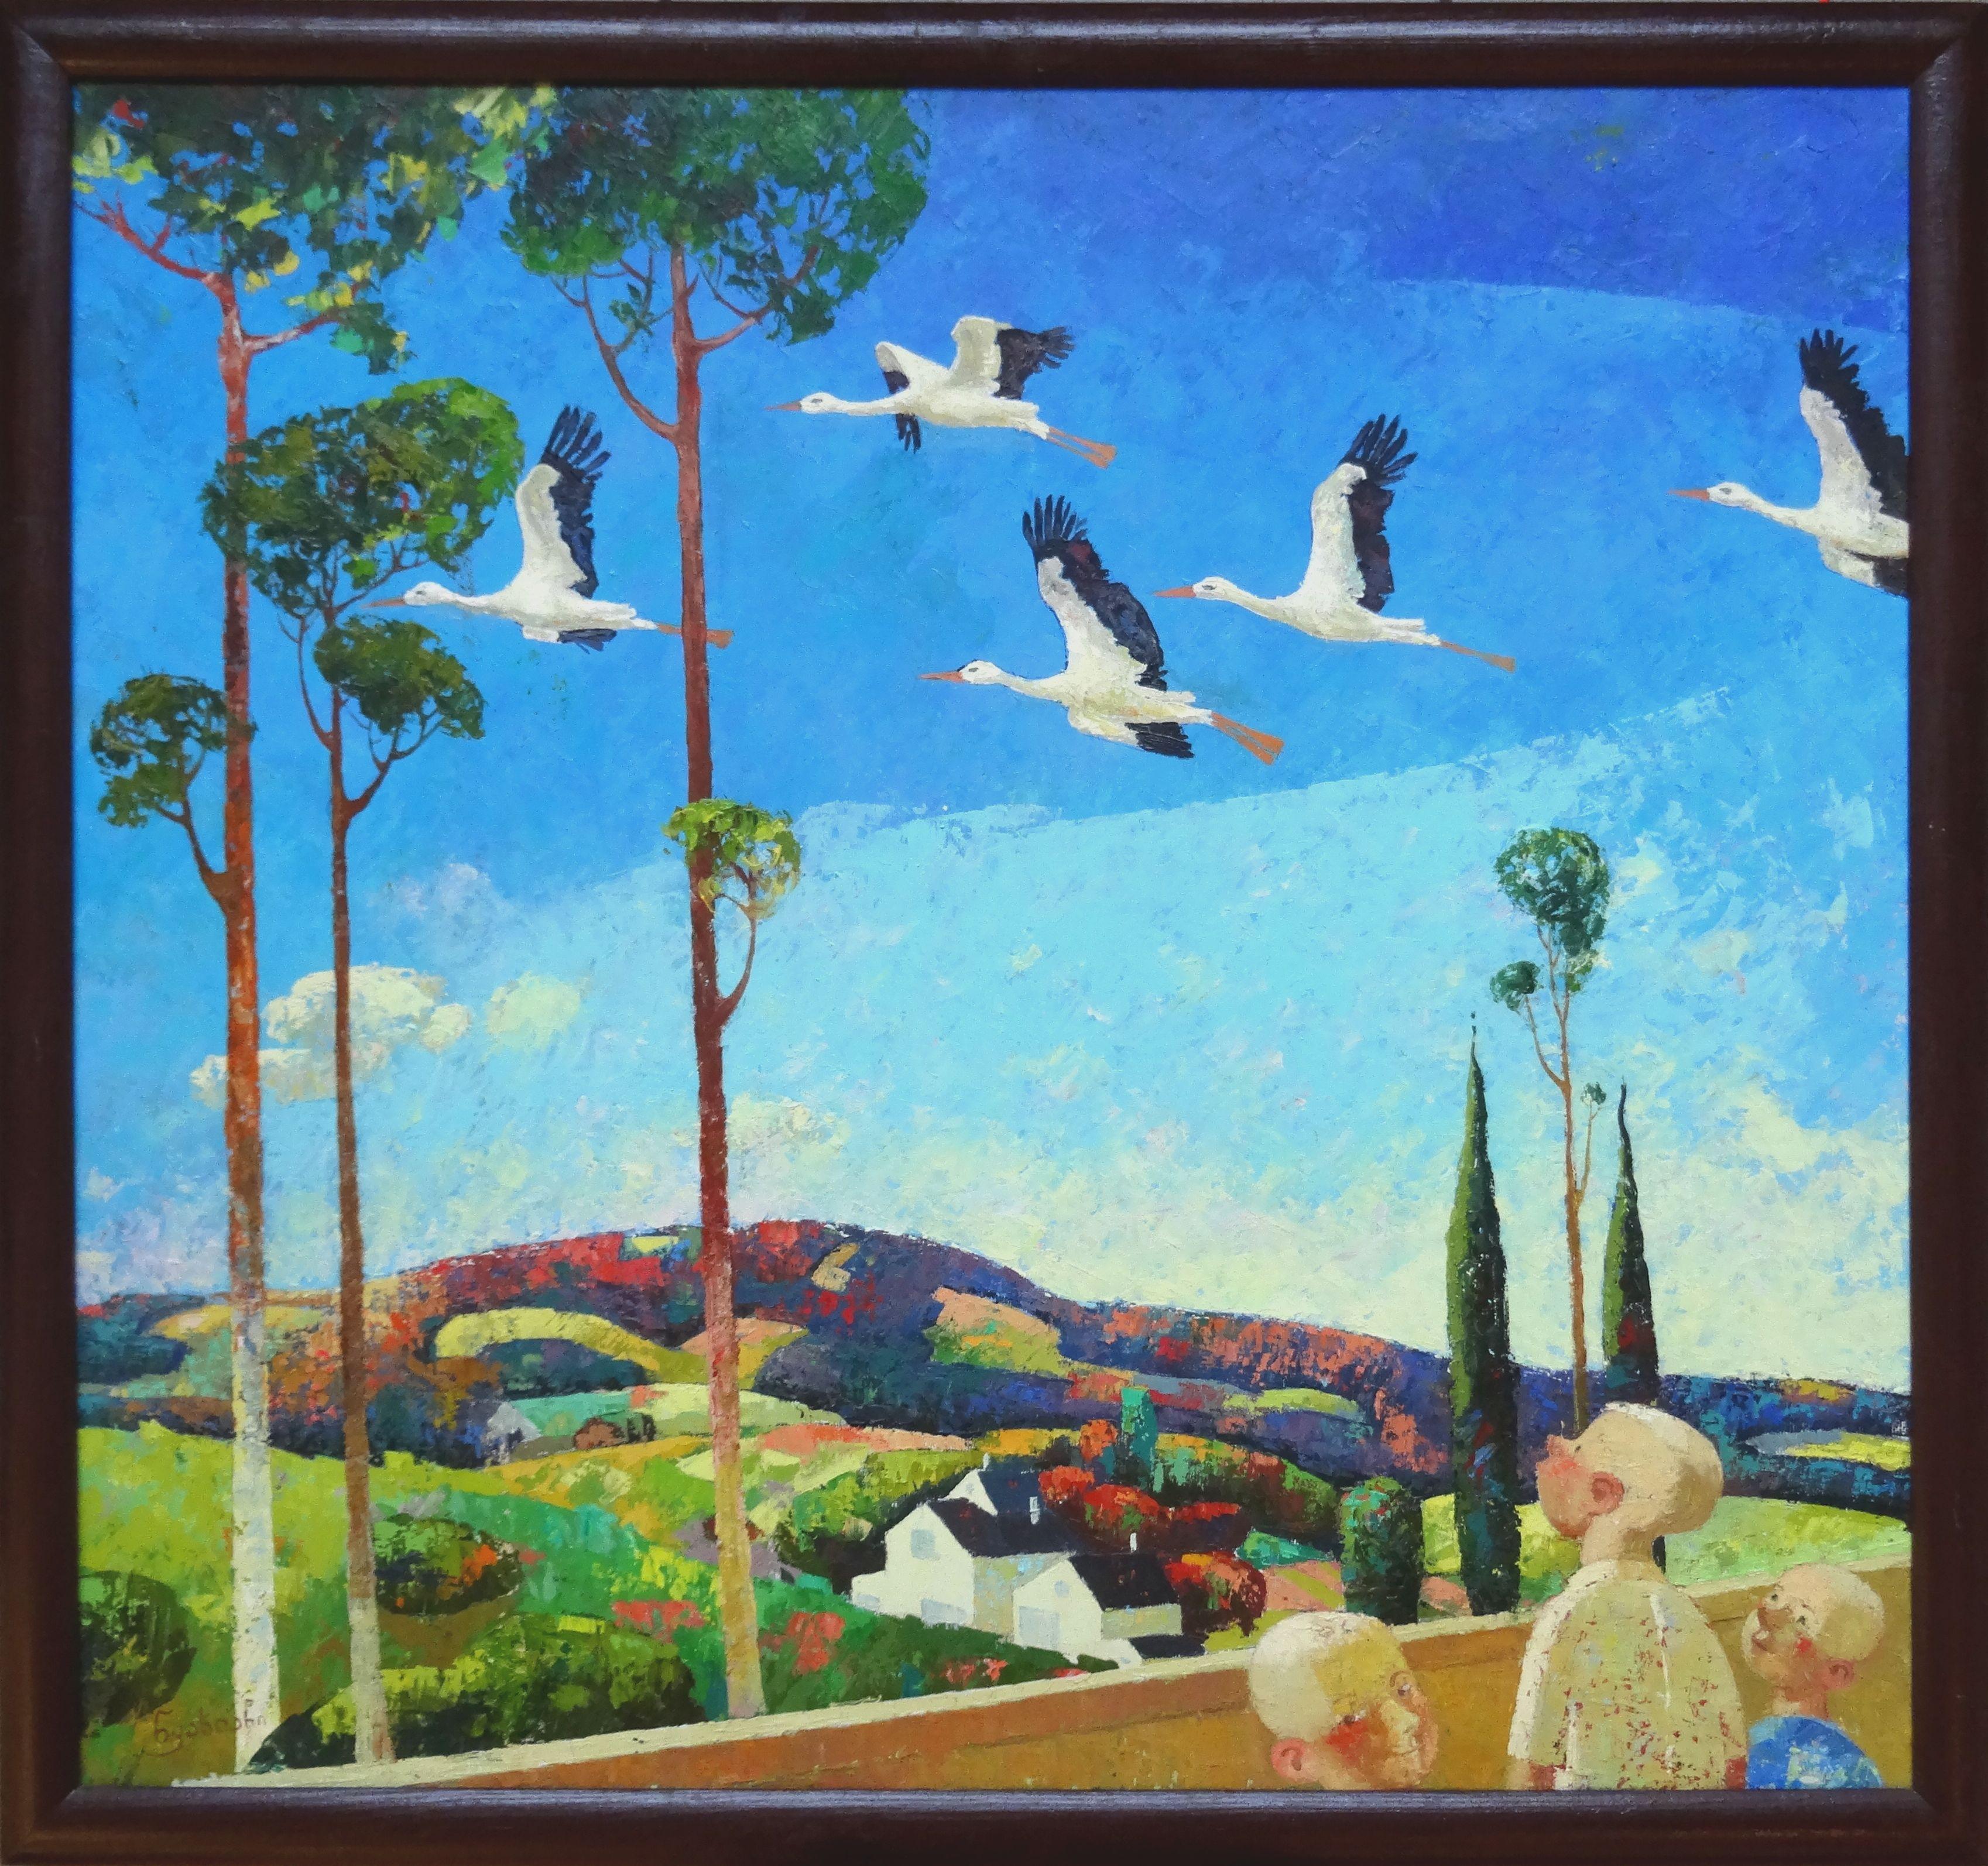 Cranes are Flying, 2011., oil on canvas, 65x70 cm